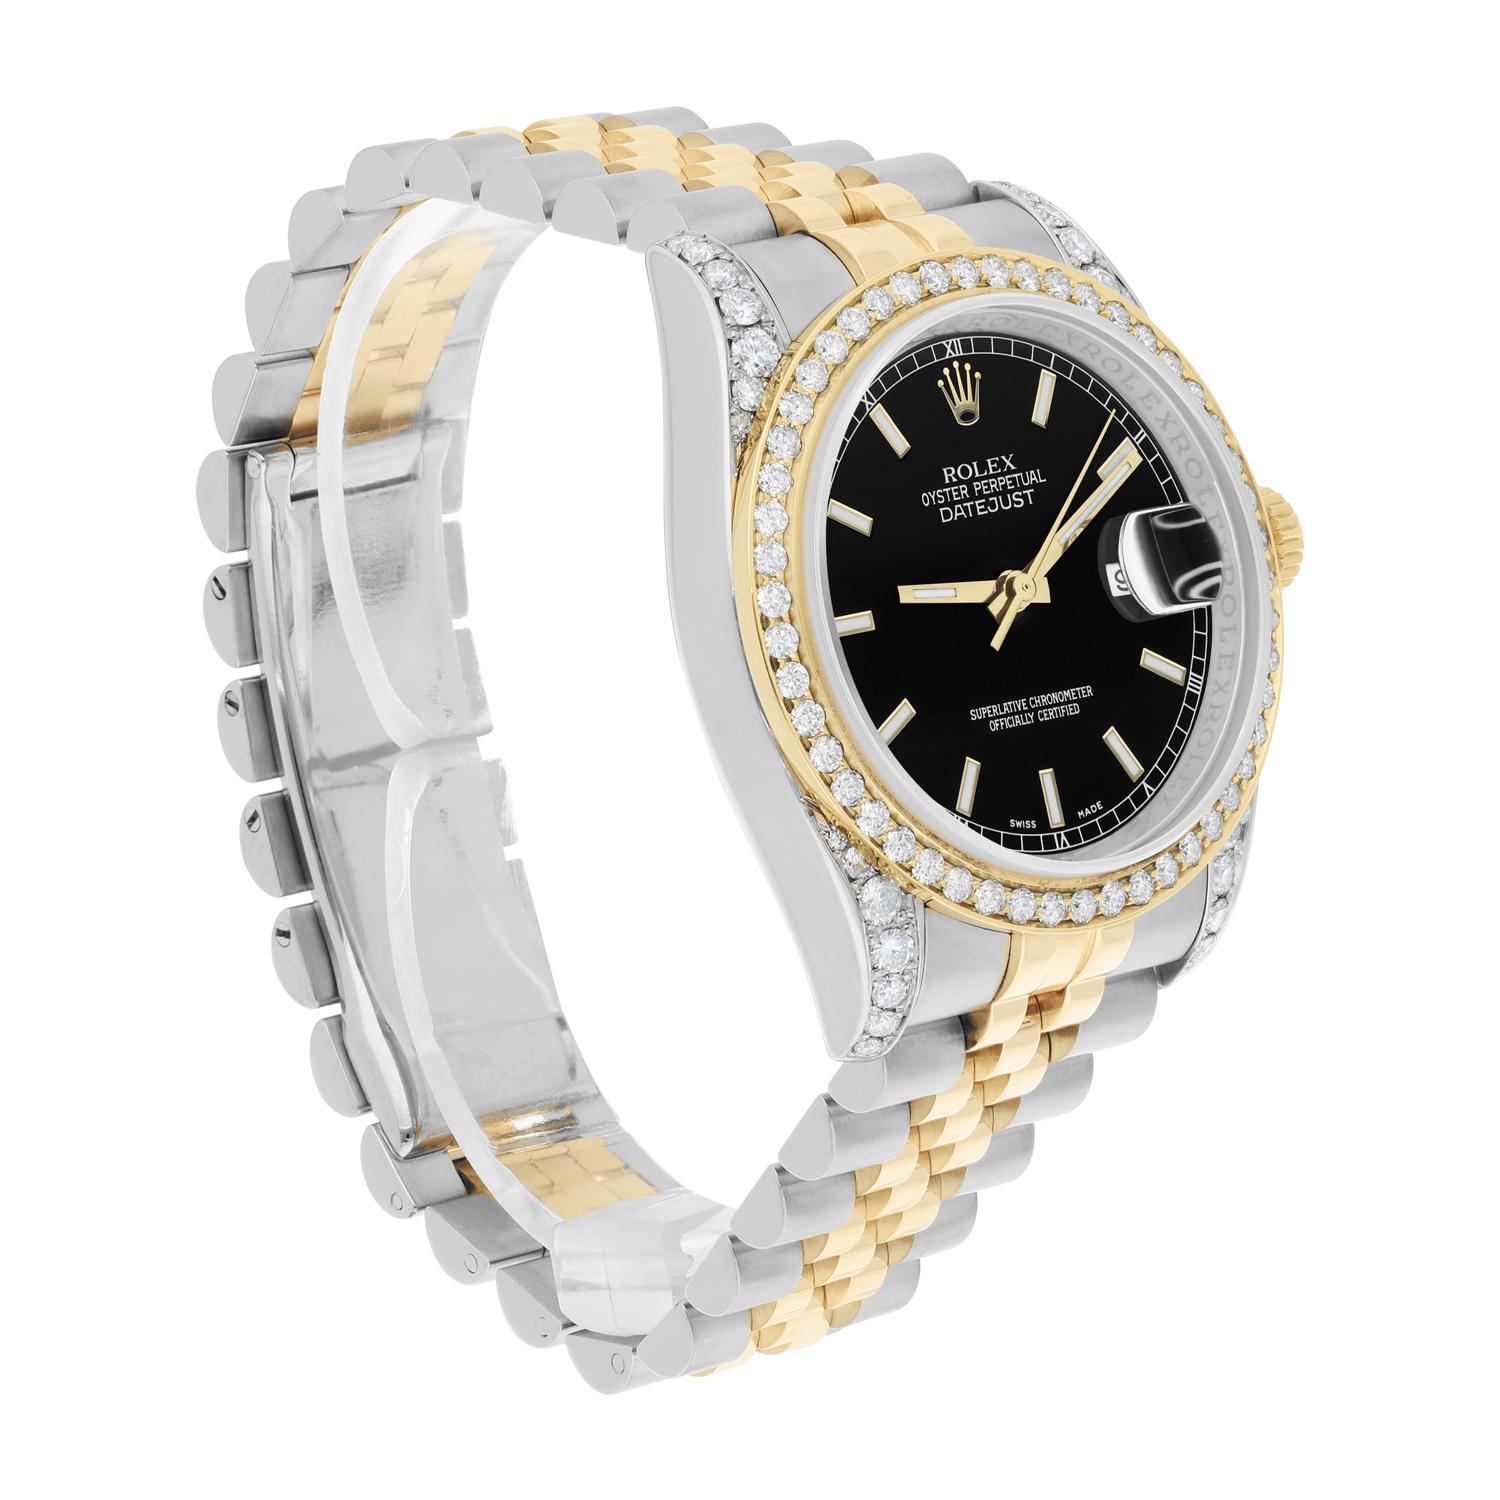 Rolex Datejust 36 Gold/Steel 116233 Black Index Dial Jubilee Band Diamond Watch For Sale 2